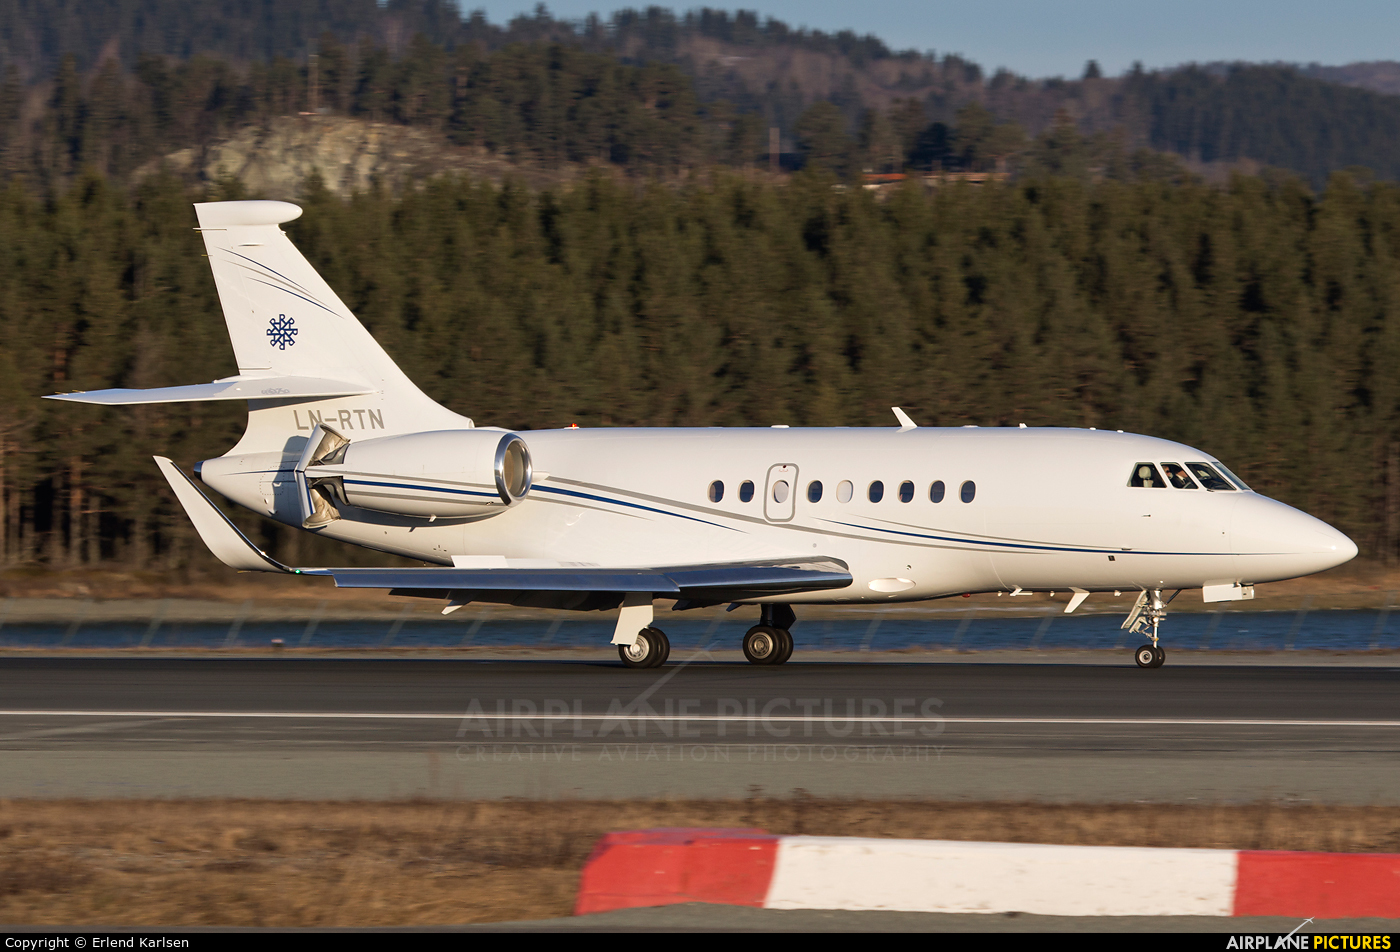 Rely AS LN-RTN aircraft at Trondheim - Vaernes